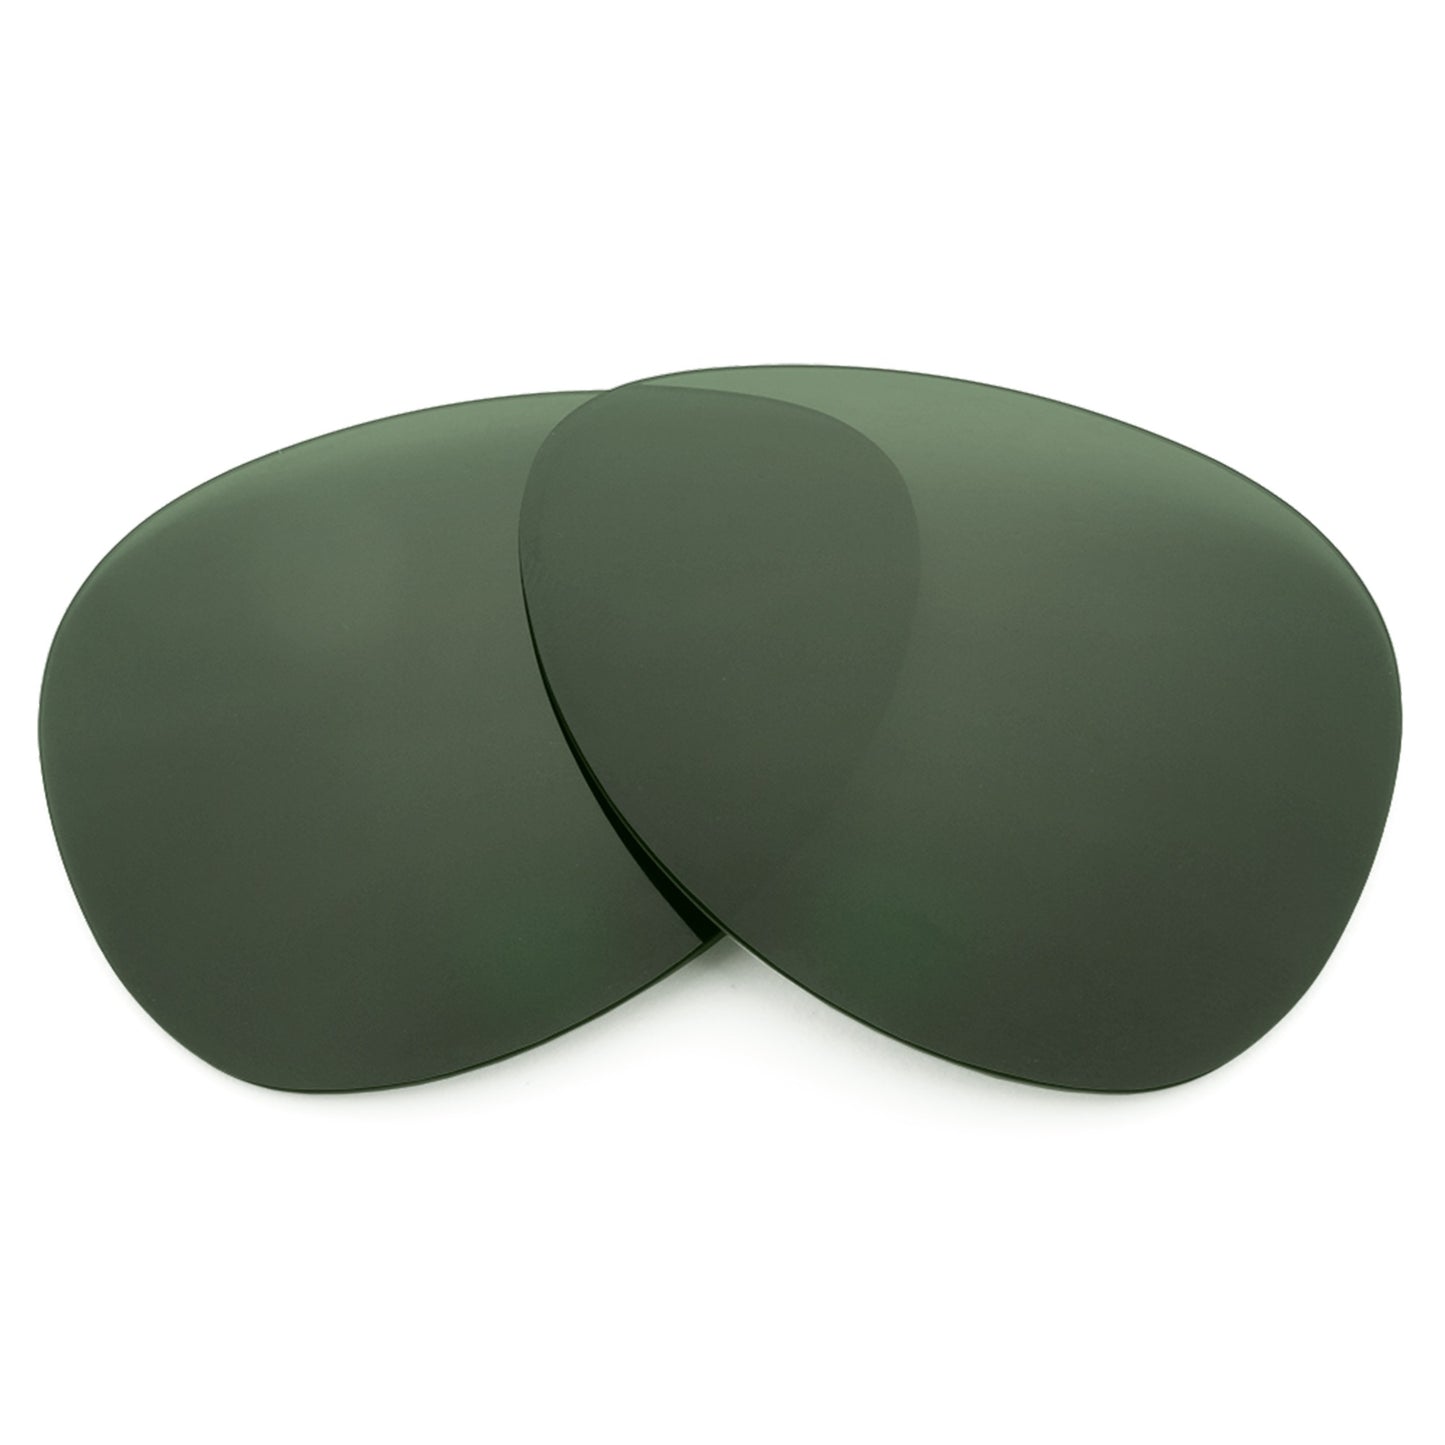 Revant replacement lenses for Ray-Ban Outdoorsman II RB3029 62mm Elite Polarized Gray Green